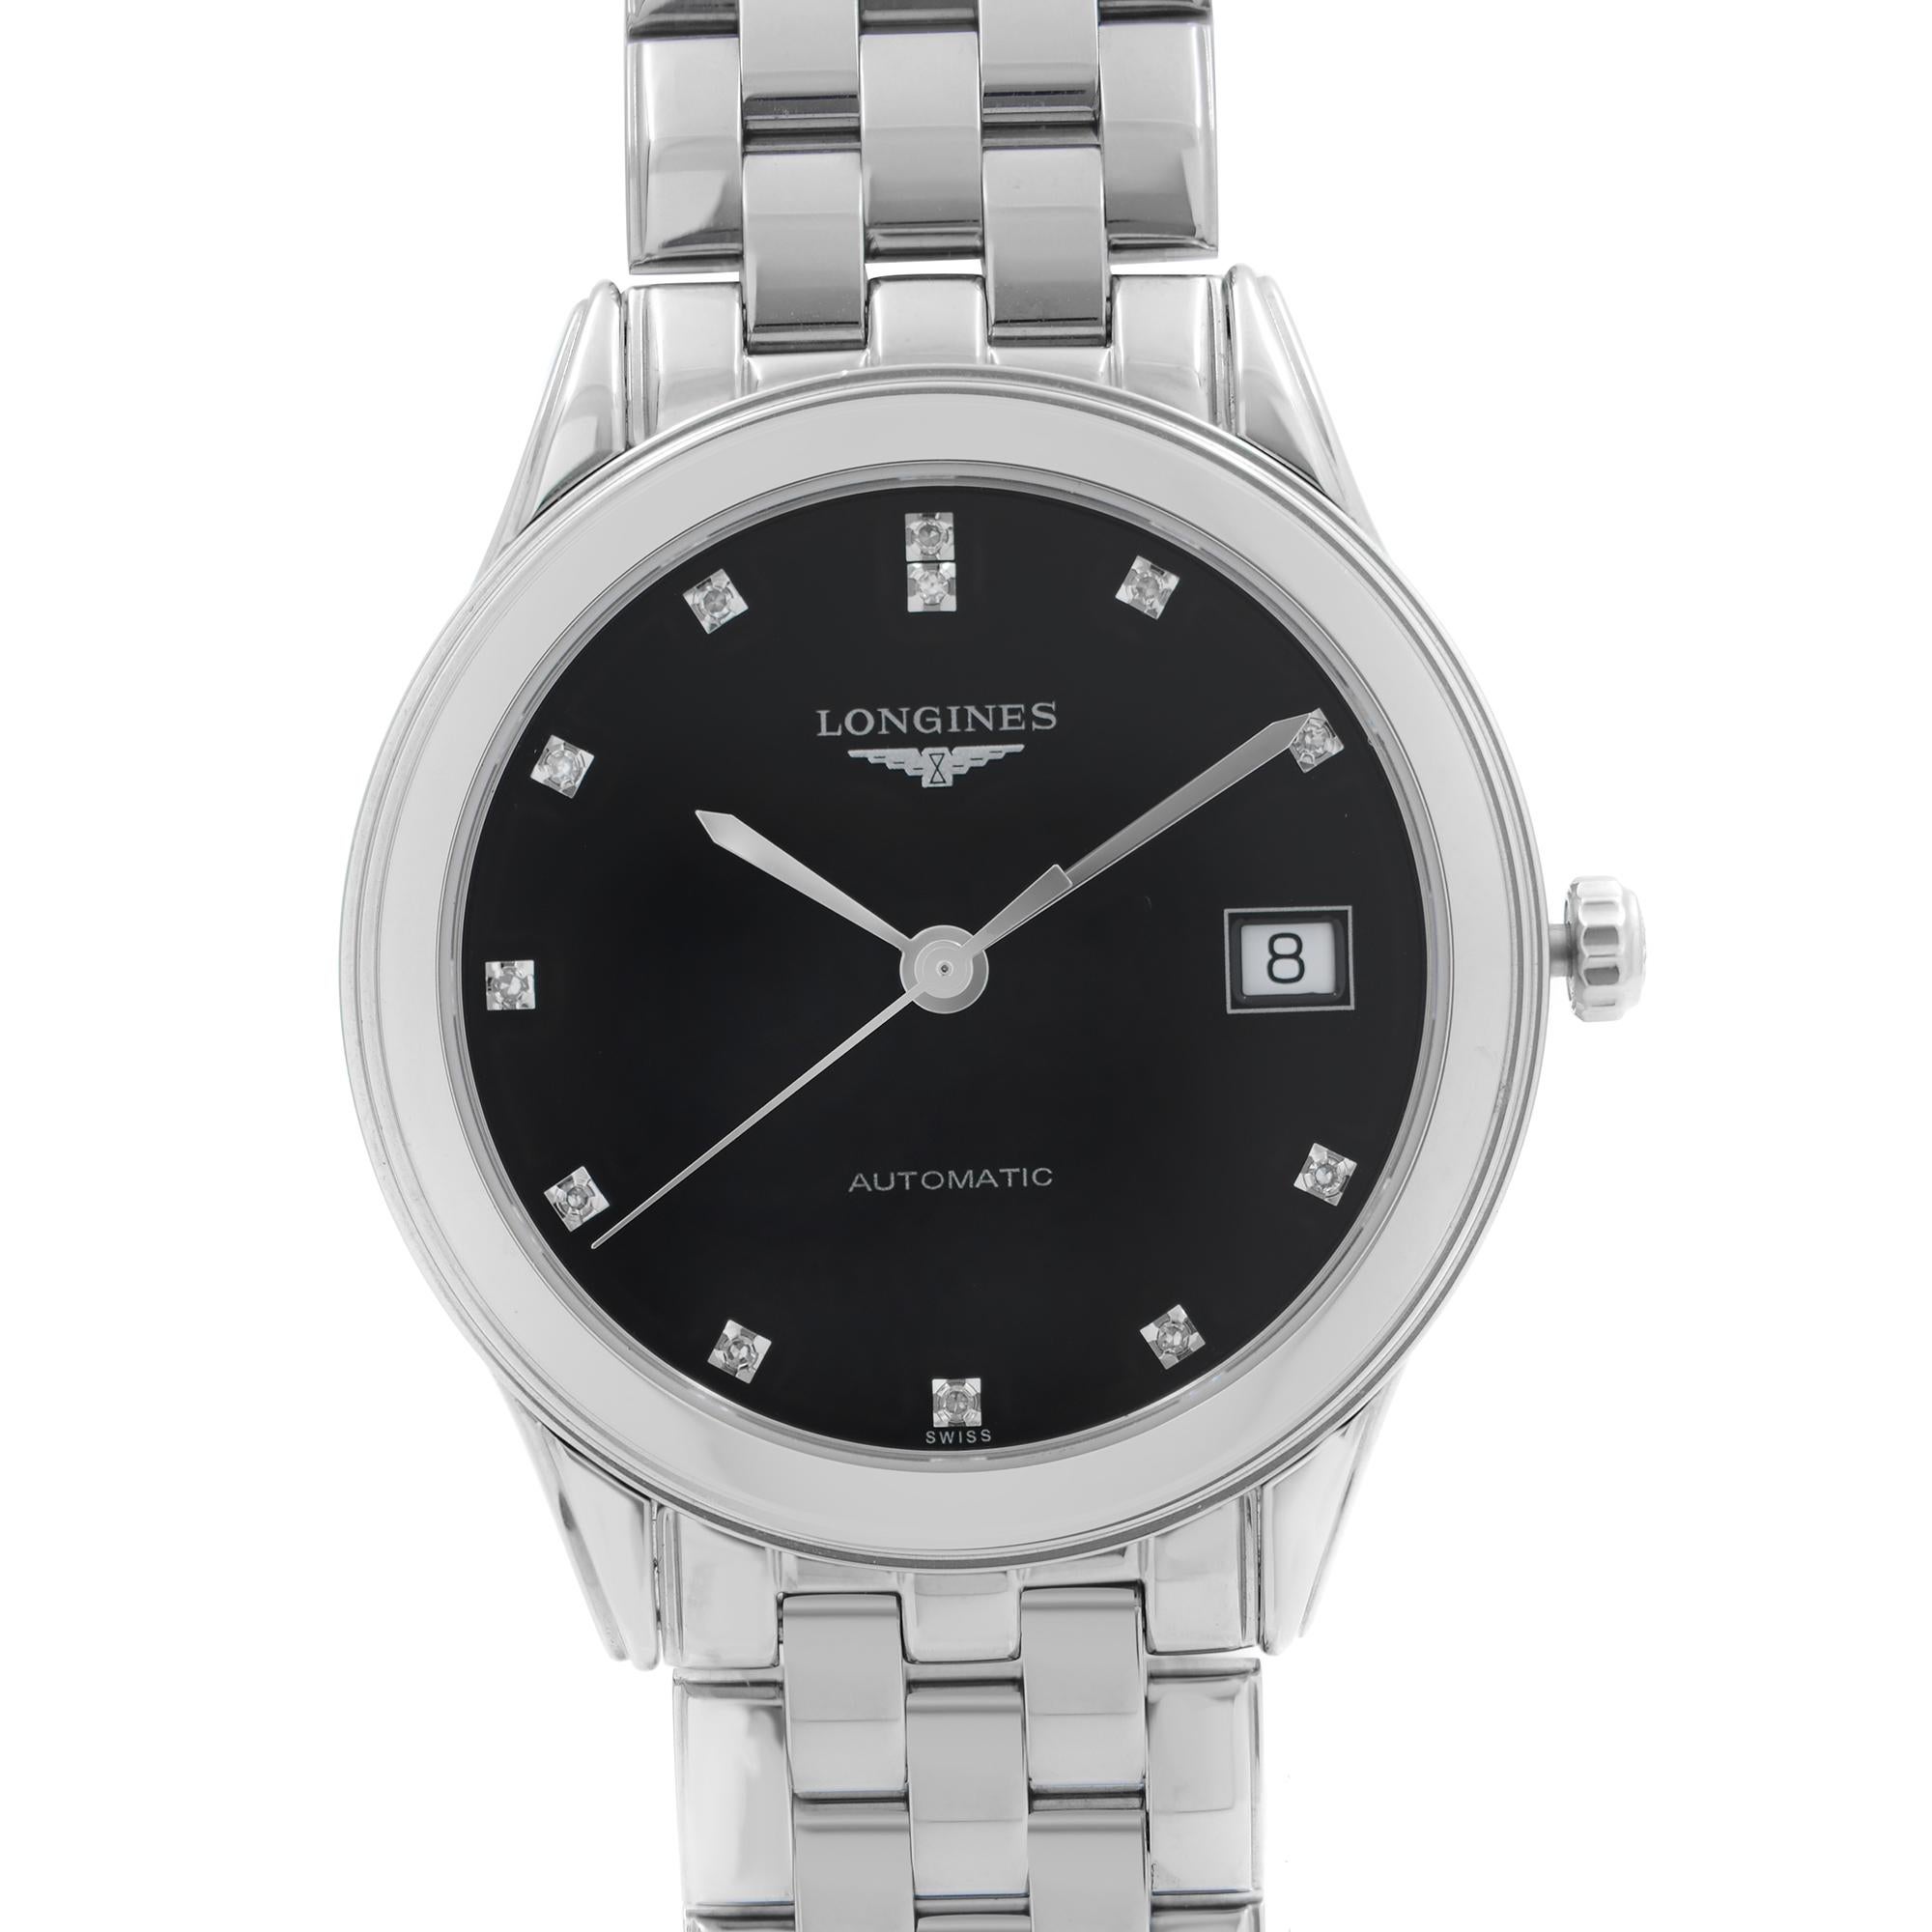 Display Model Longines Flagship Stainless Steel Black Diamond Dial Automatic Mens Watch L4.774.4.57.6. This Beautiful Timepiece is Powered by Mechanical (Automatic) Movement And Features: Round Stainless Steel Case & Bracelet, Fixed Stainless Steel